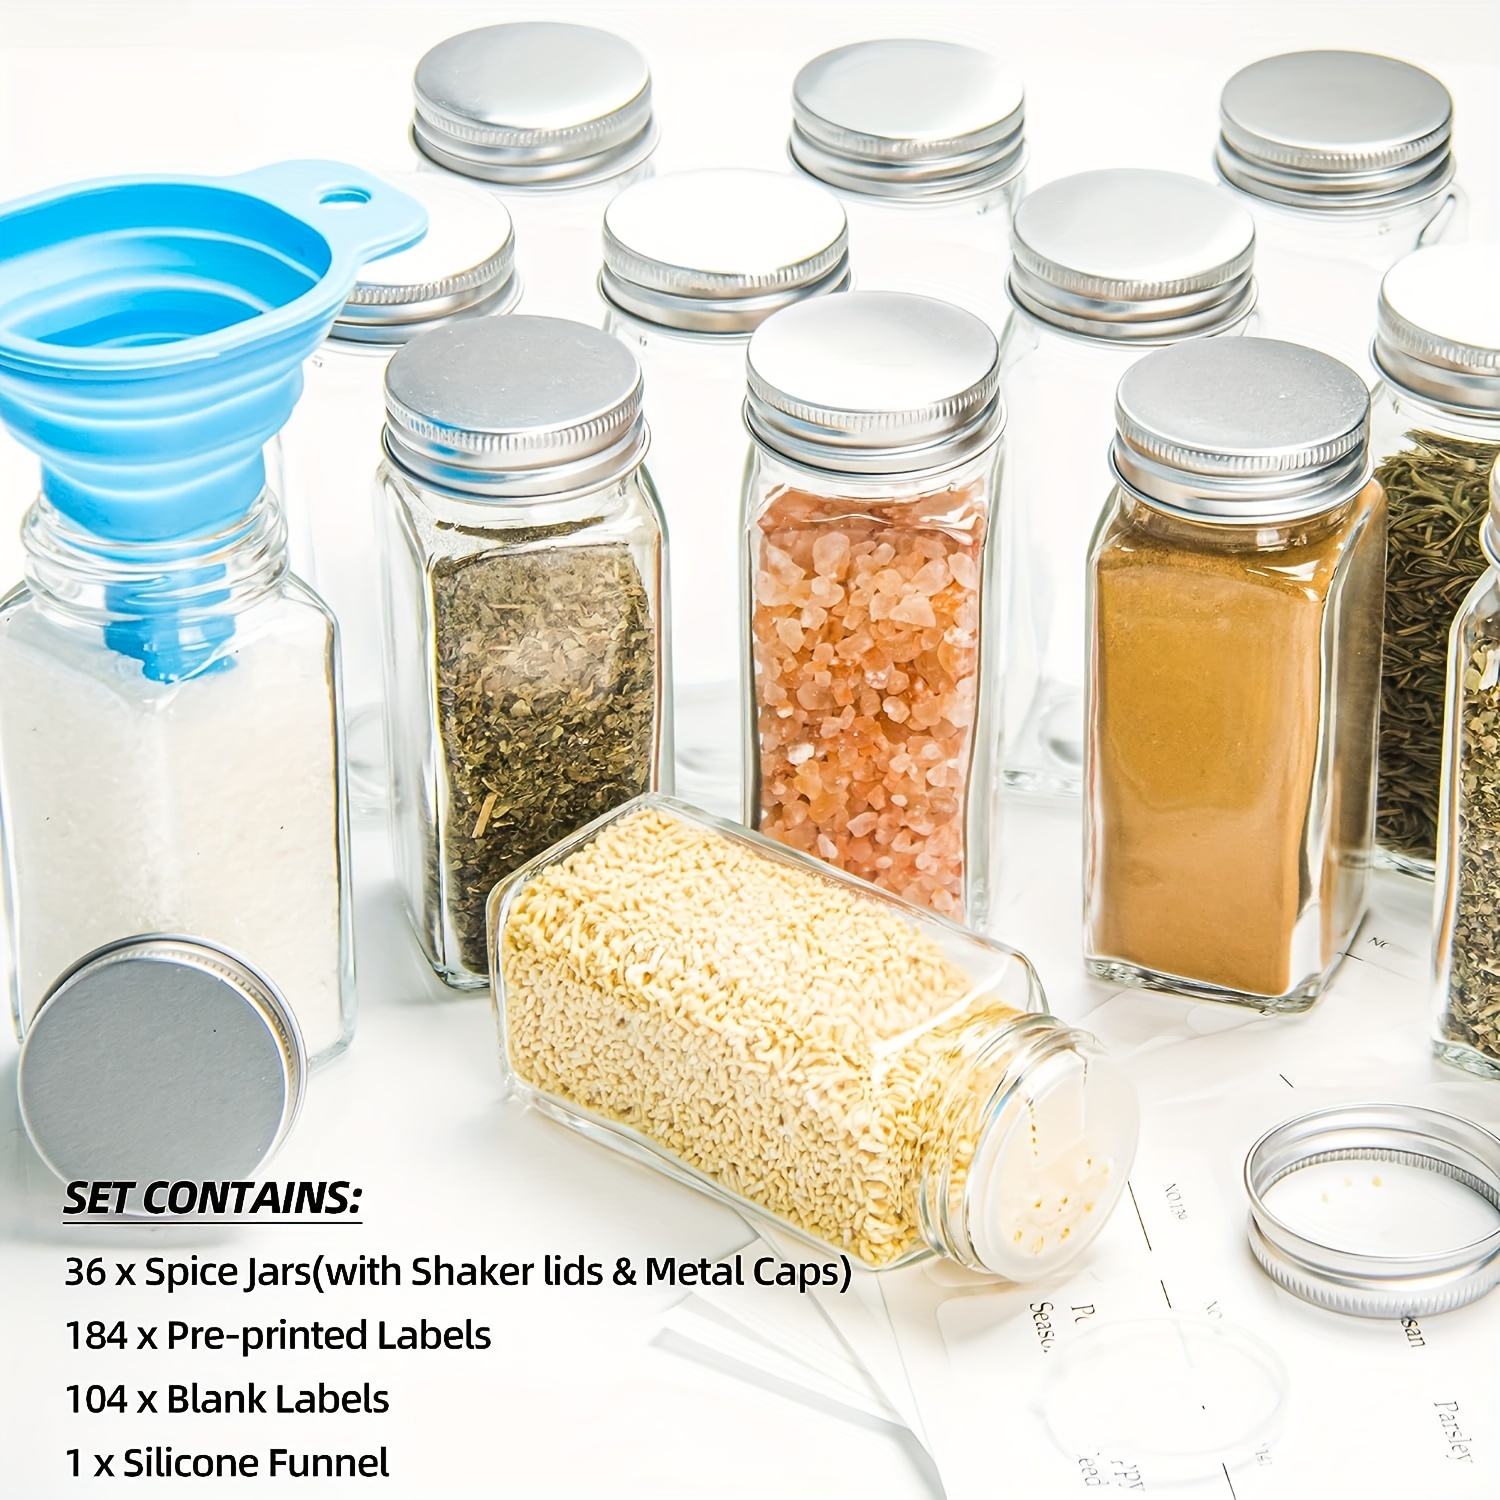 New! Spice Bottles Empty Glass with Labels 4 oz - 36 Piece Spice